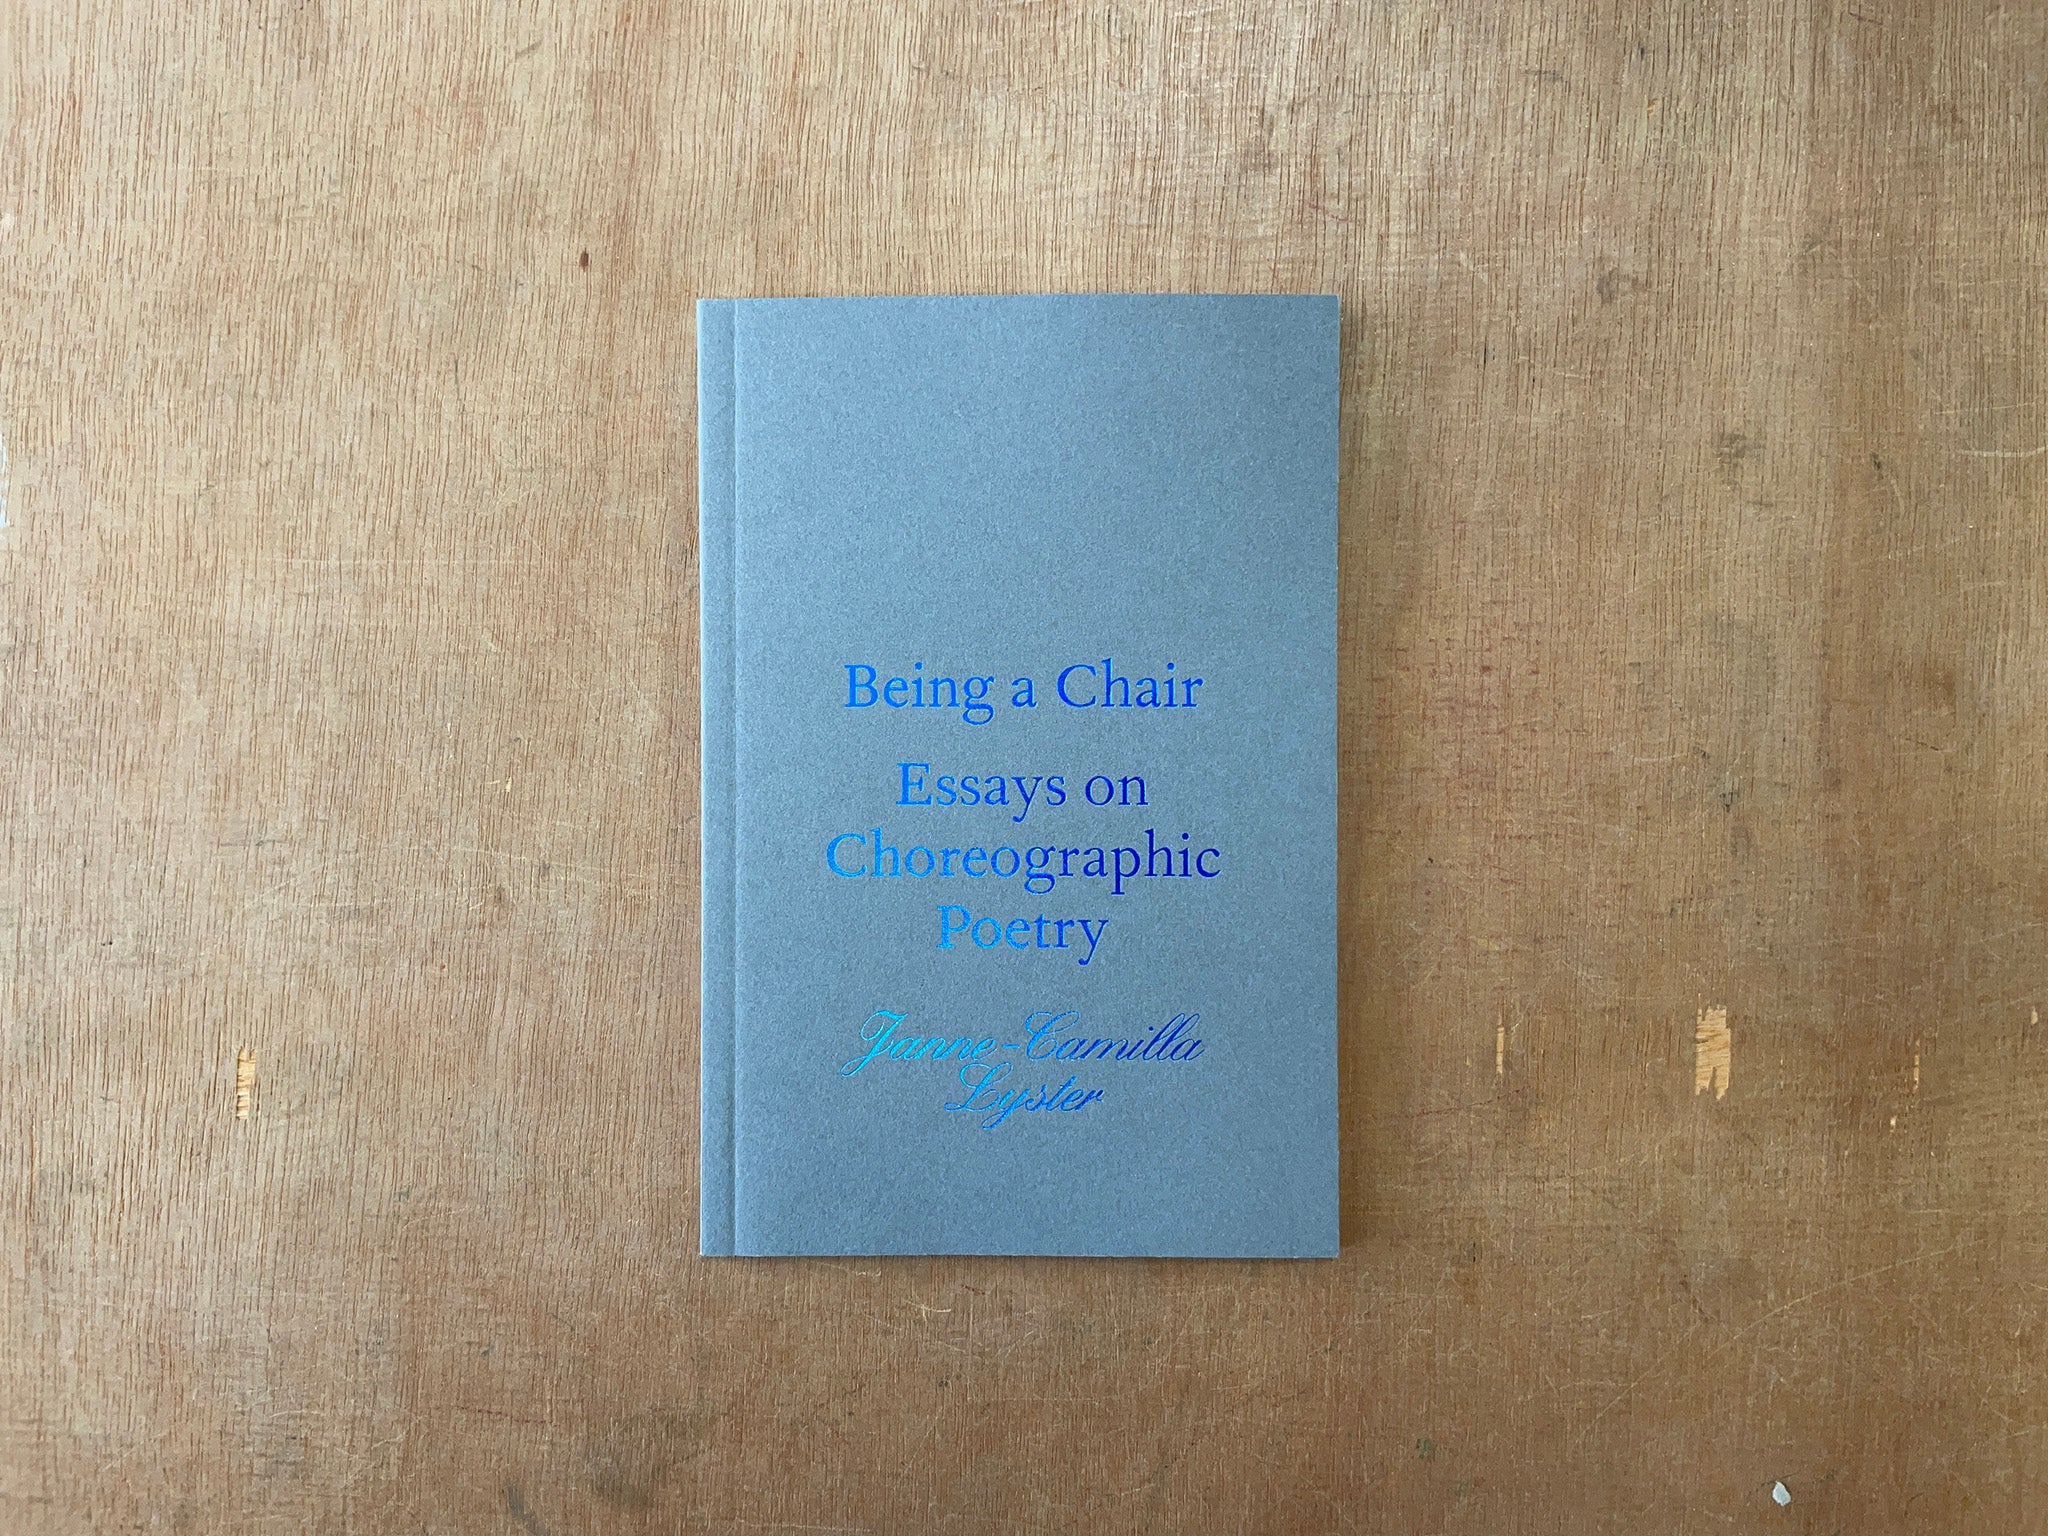 BEING A CHAIR: ESSAYS ON CHOREOGRAPHIC POETRY by Janne-Camilla Lyster